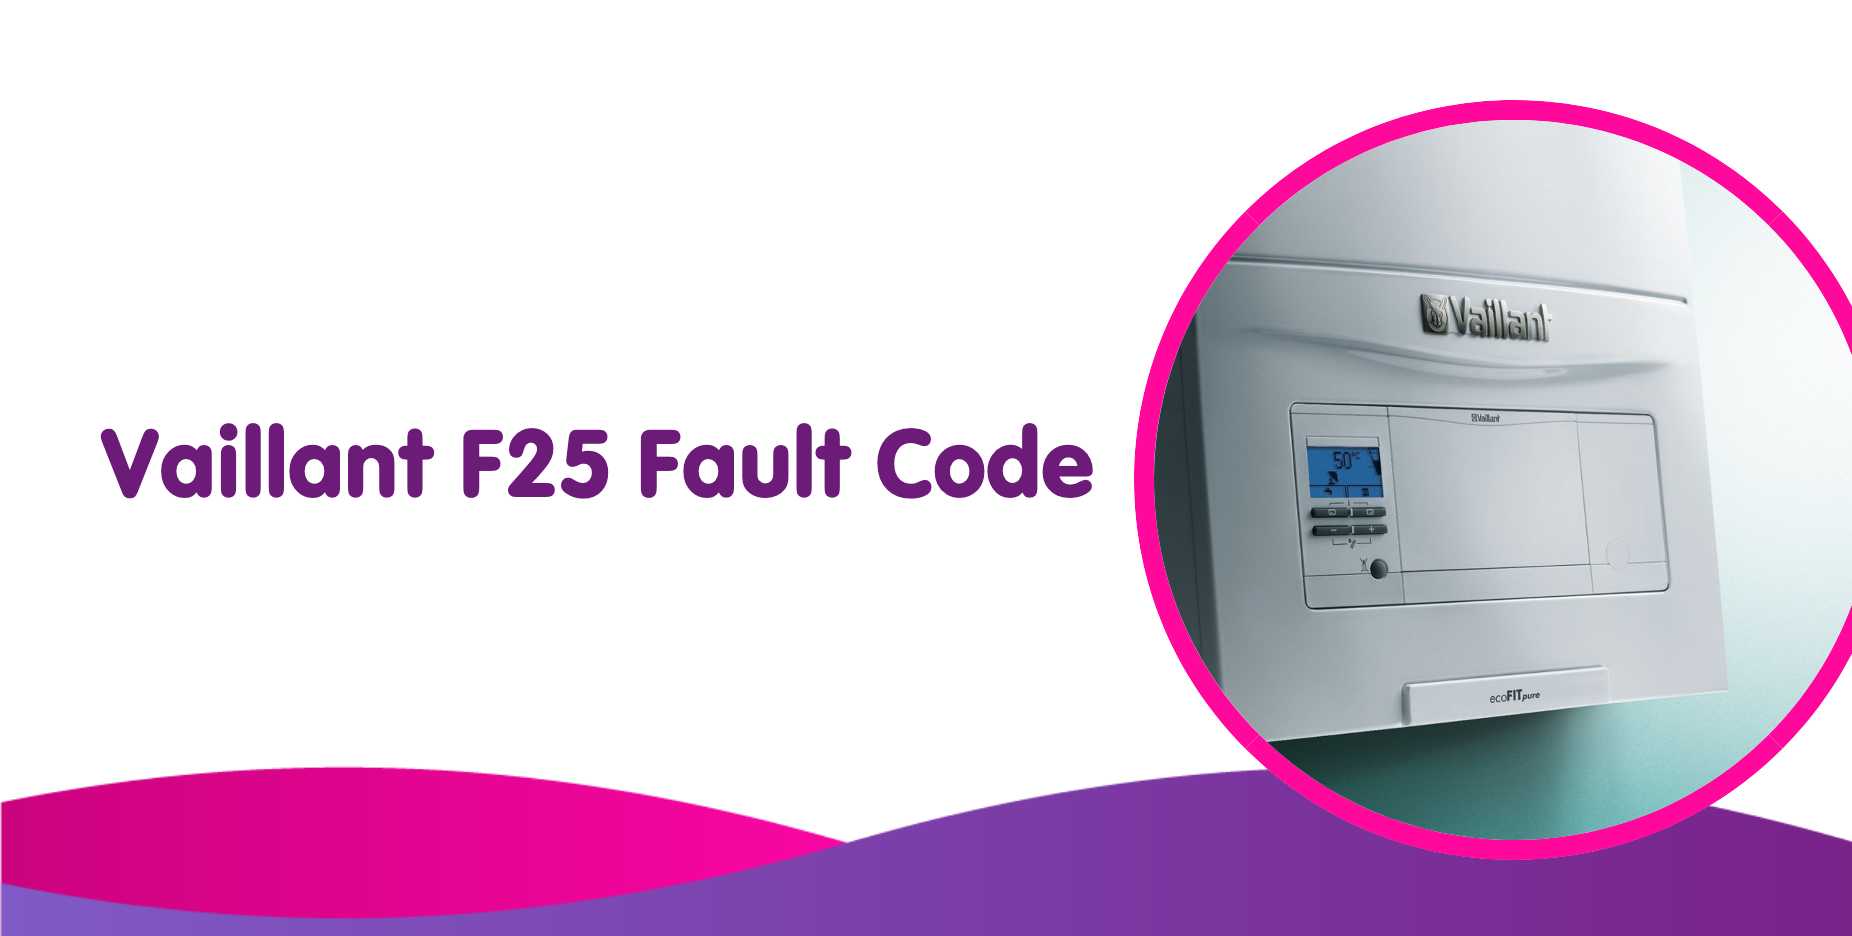 The Vaillant F25 Fault Code: Meaning and Solutions